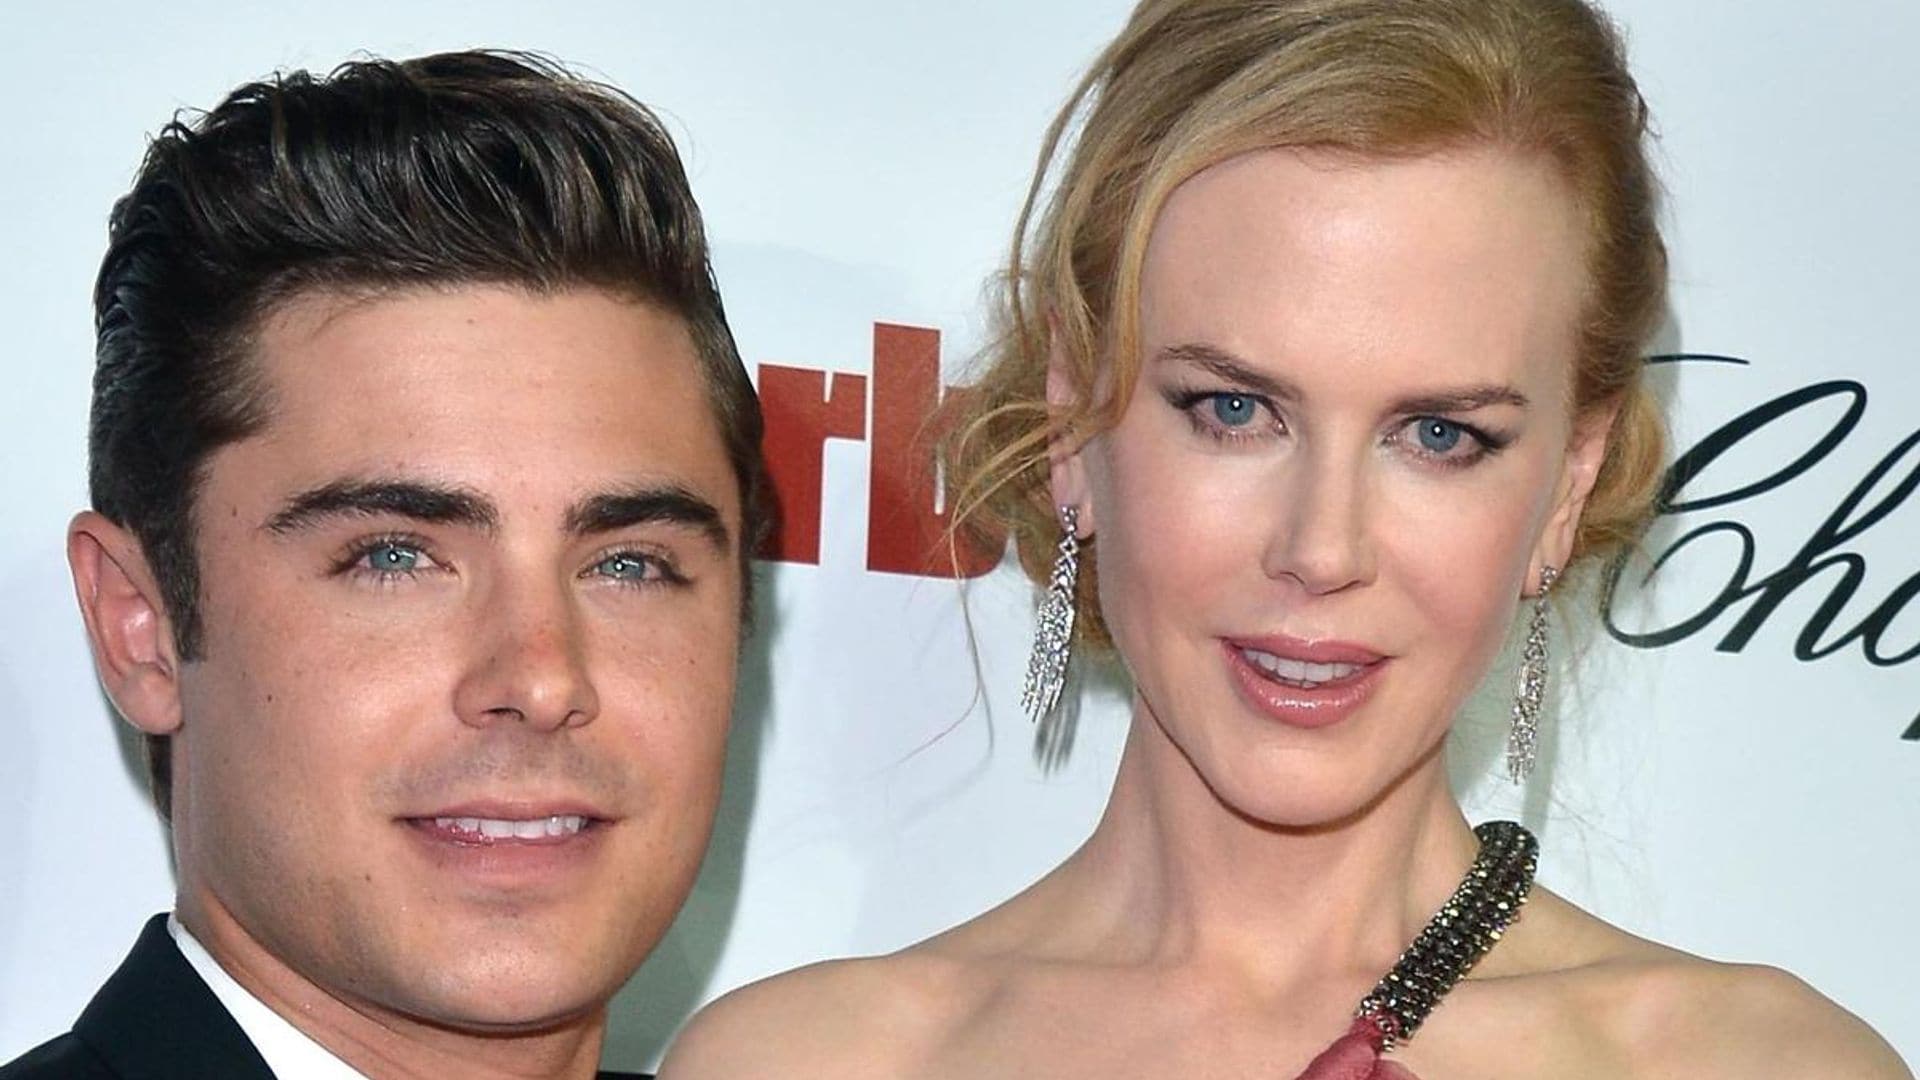 Watch Nicole Kidman and Zac Efron hook up in ‘A Family Affair’ trailer